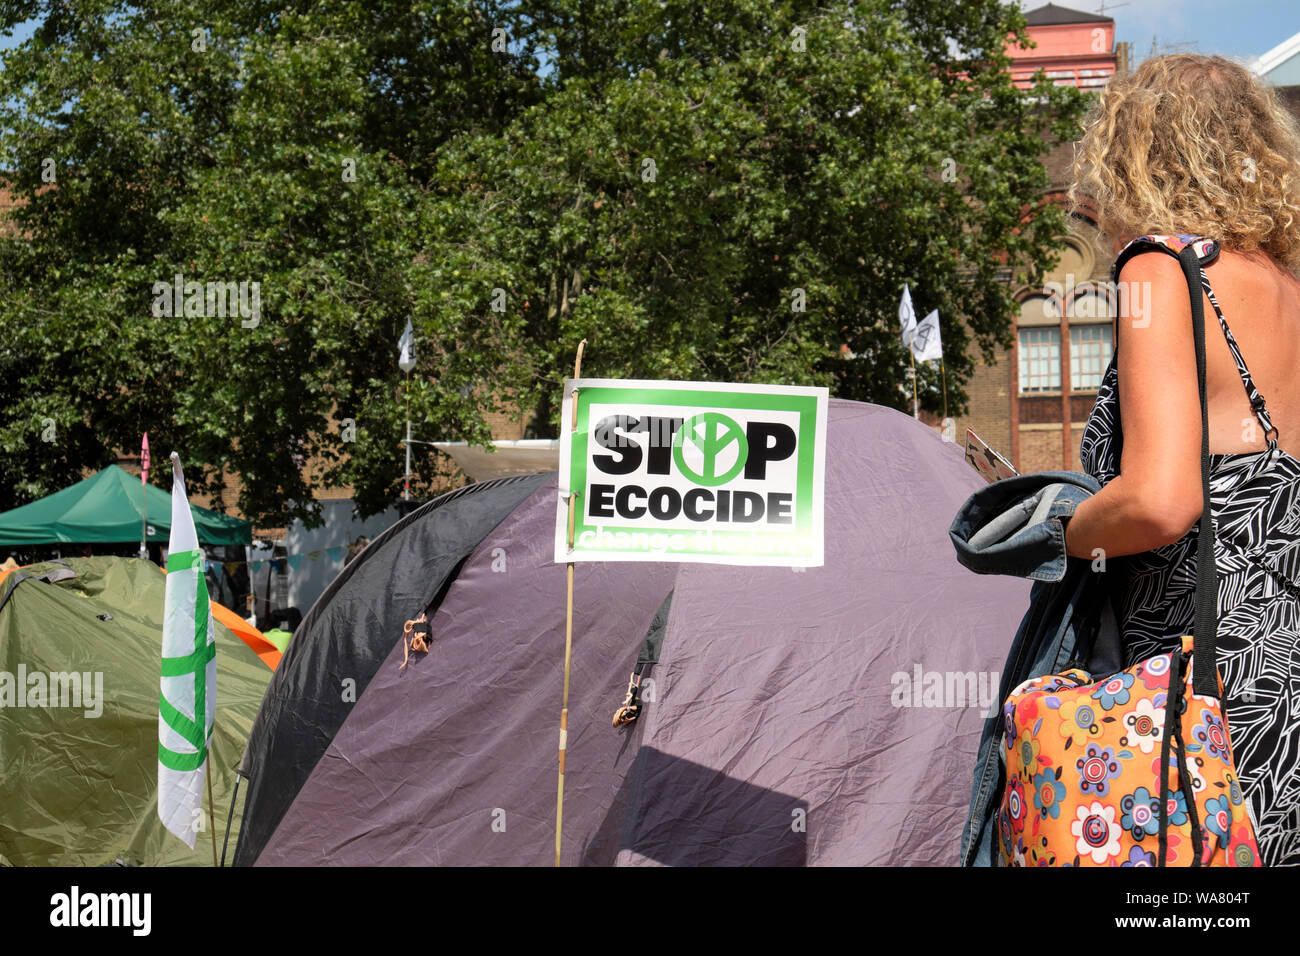 Stop Ecocide sign, woman and tents in the park Extinction Rebellion Waterloo Millennium Green in South London SE1  England UK  KATHY DEWITT Stock Photo